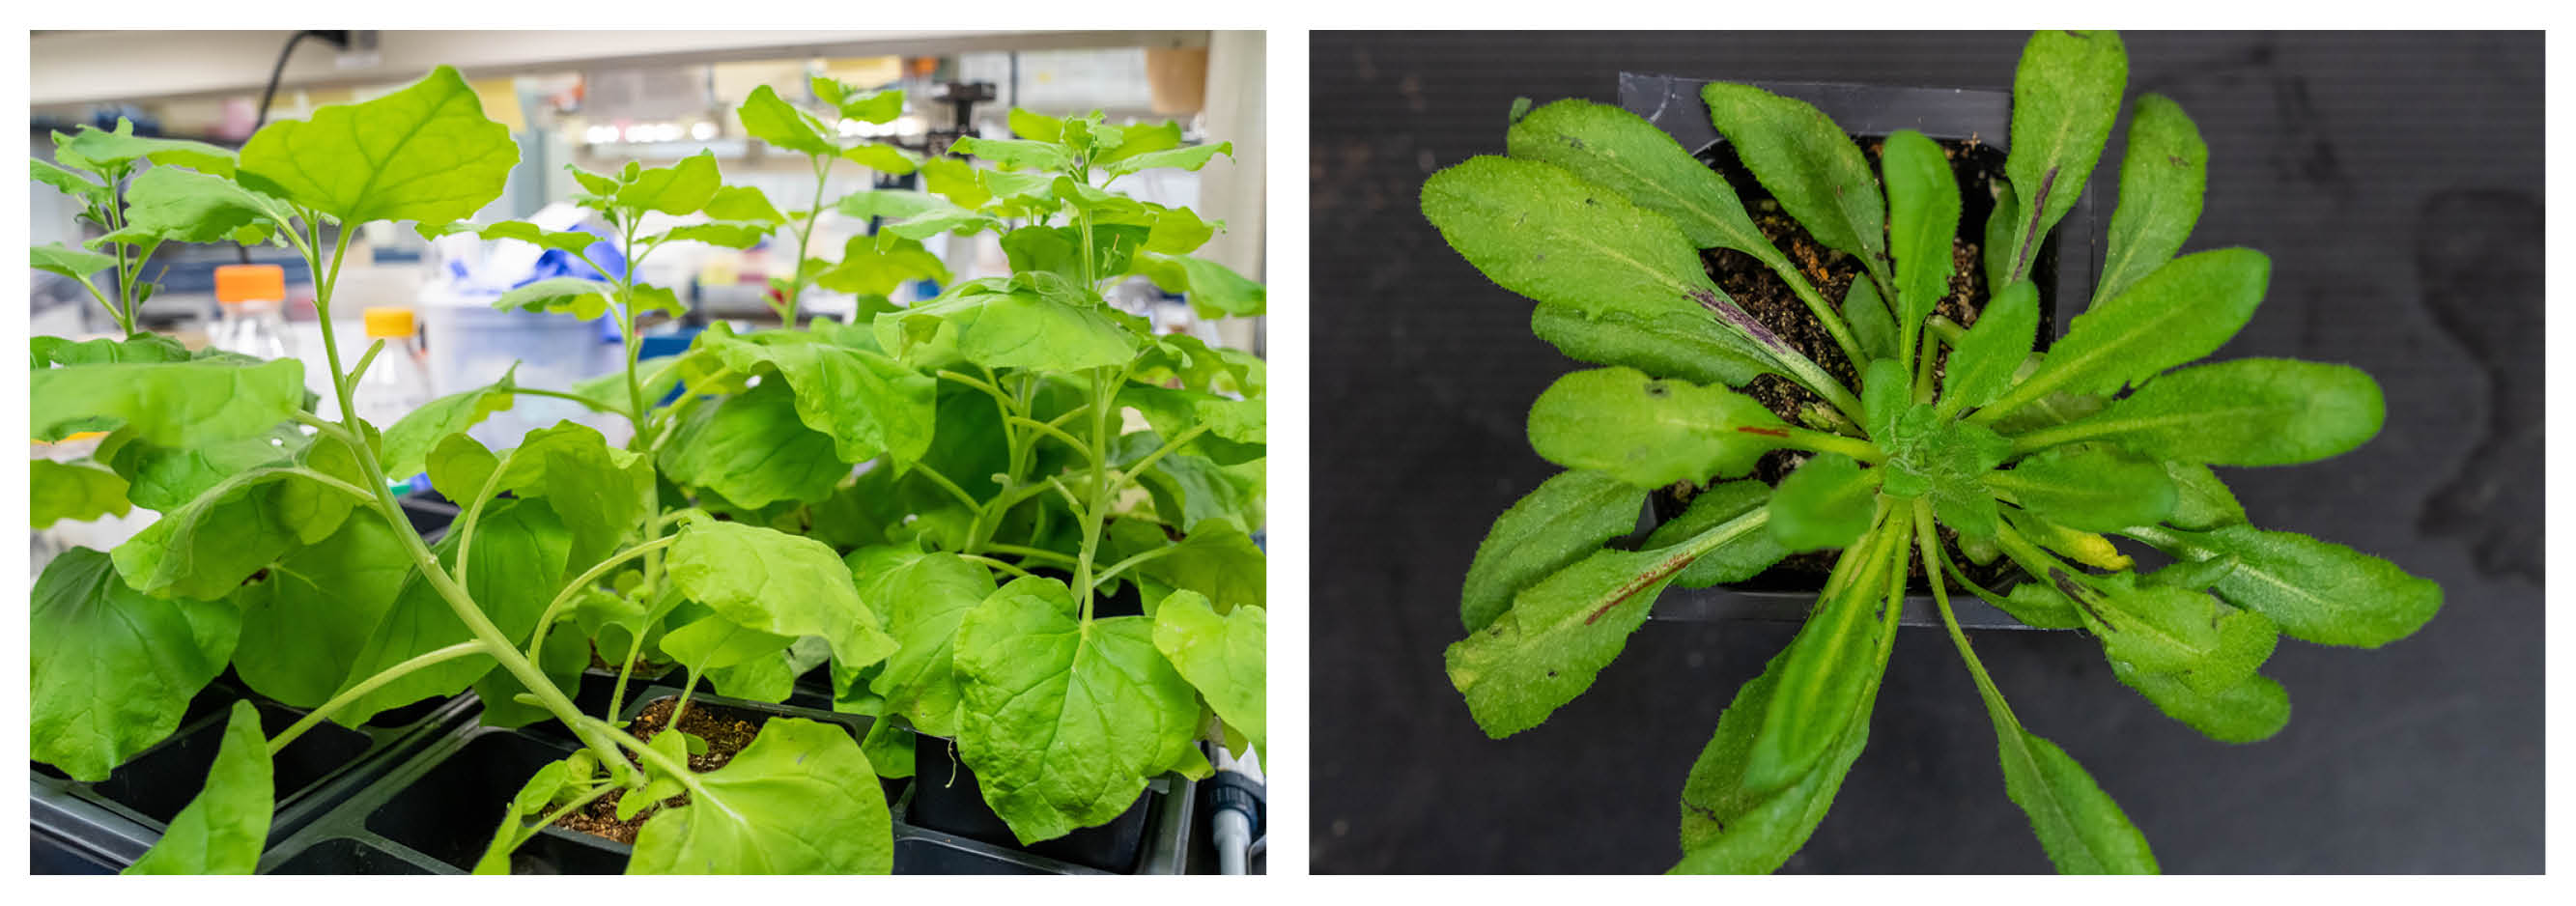 Tobacco and Arabidopsis plants side-by-side